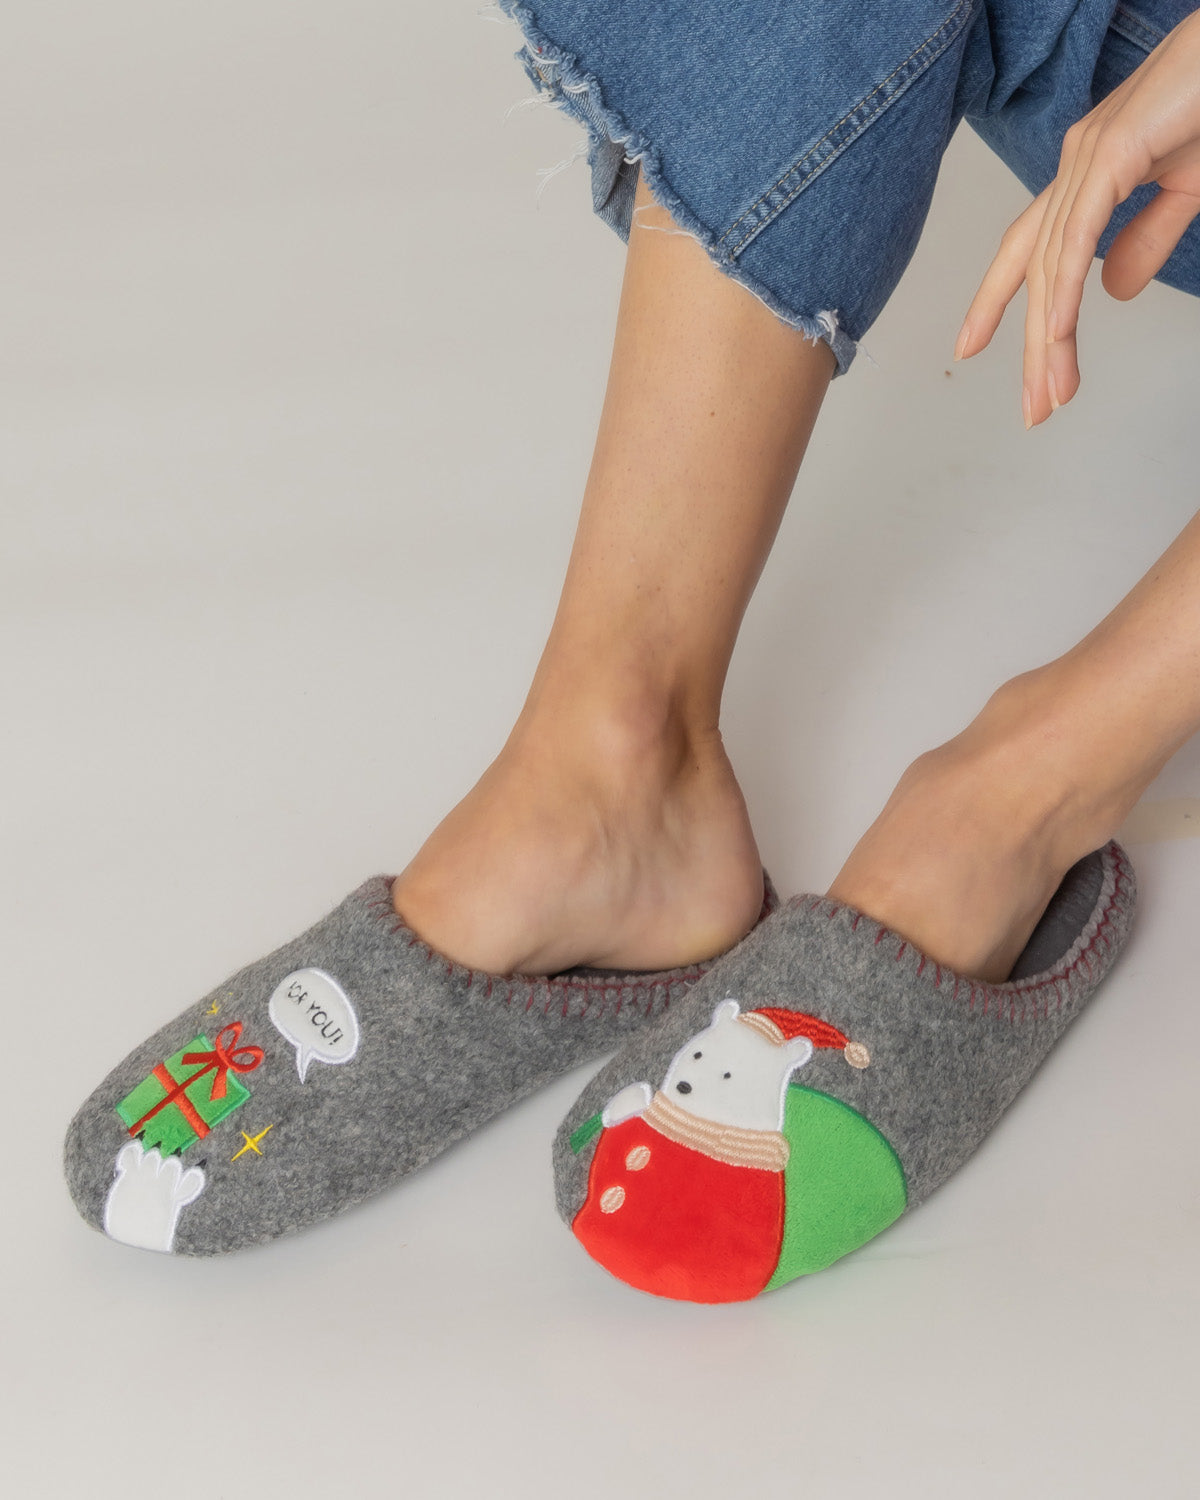 Holiday Slippers (mix pack)